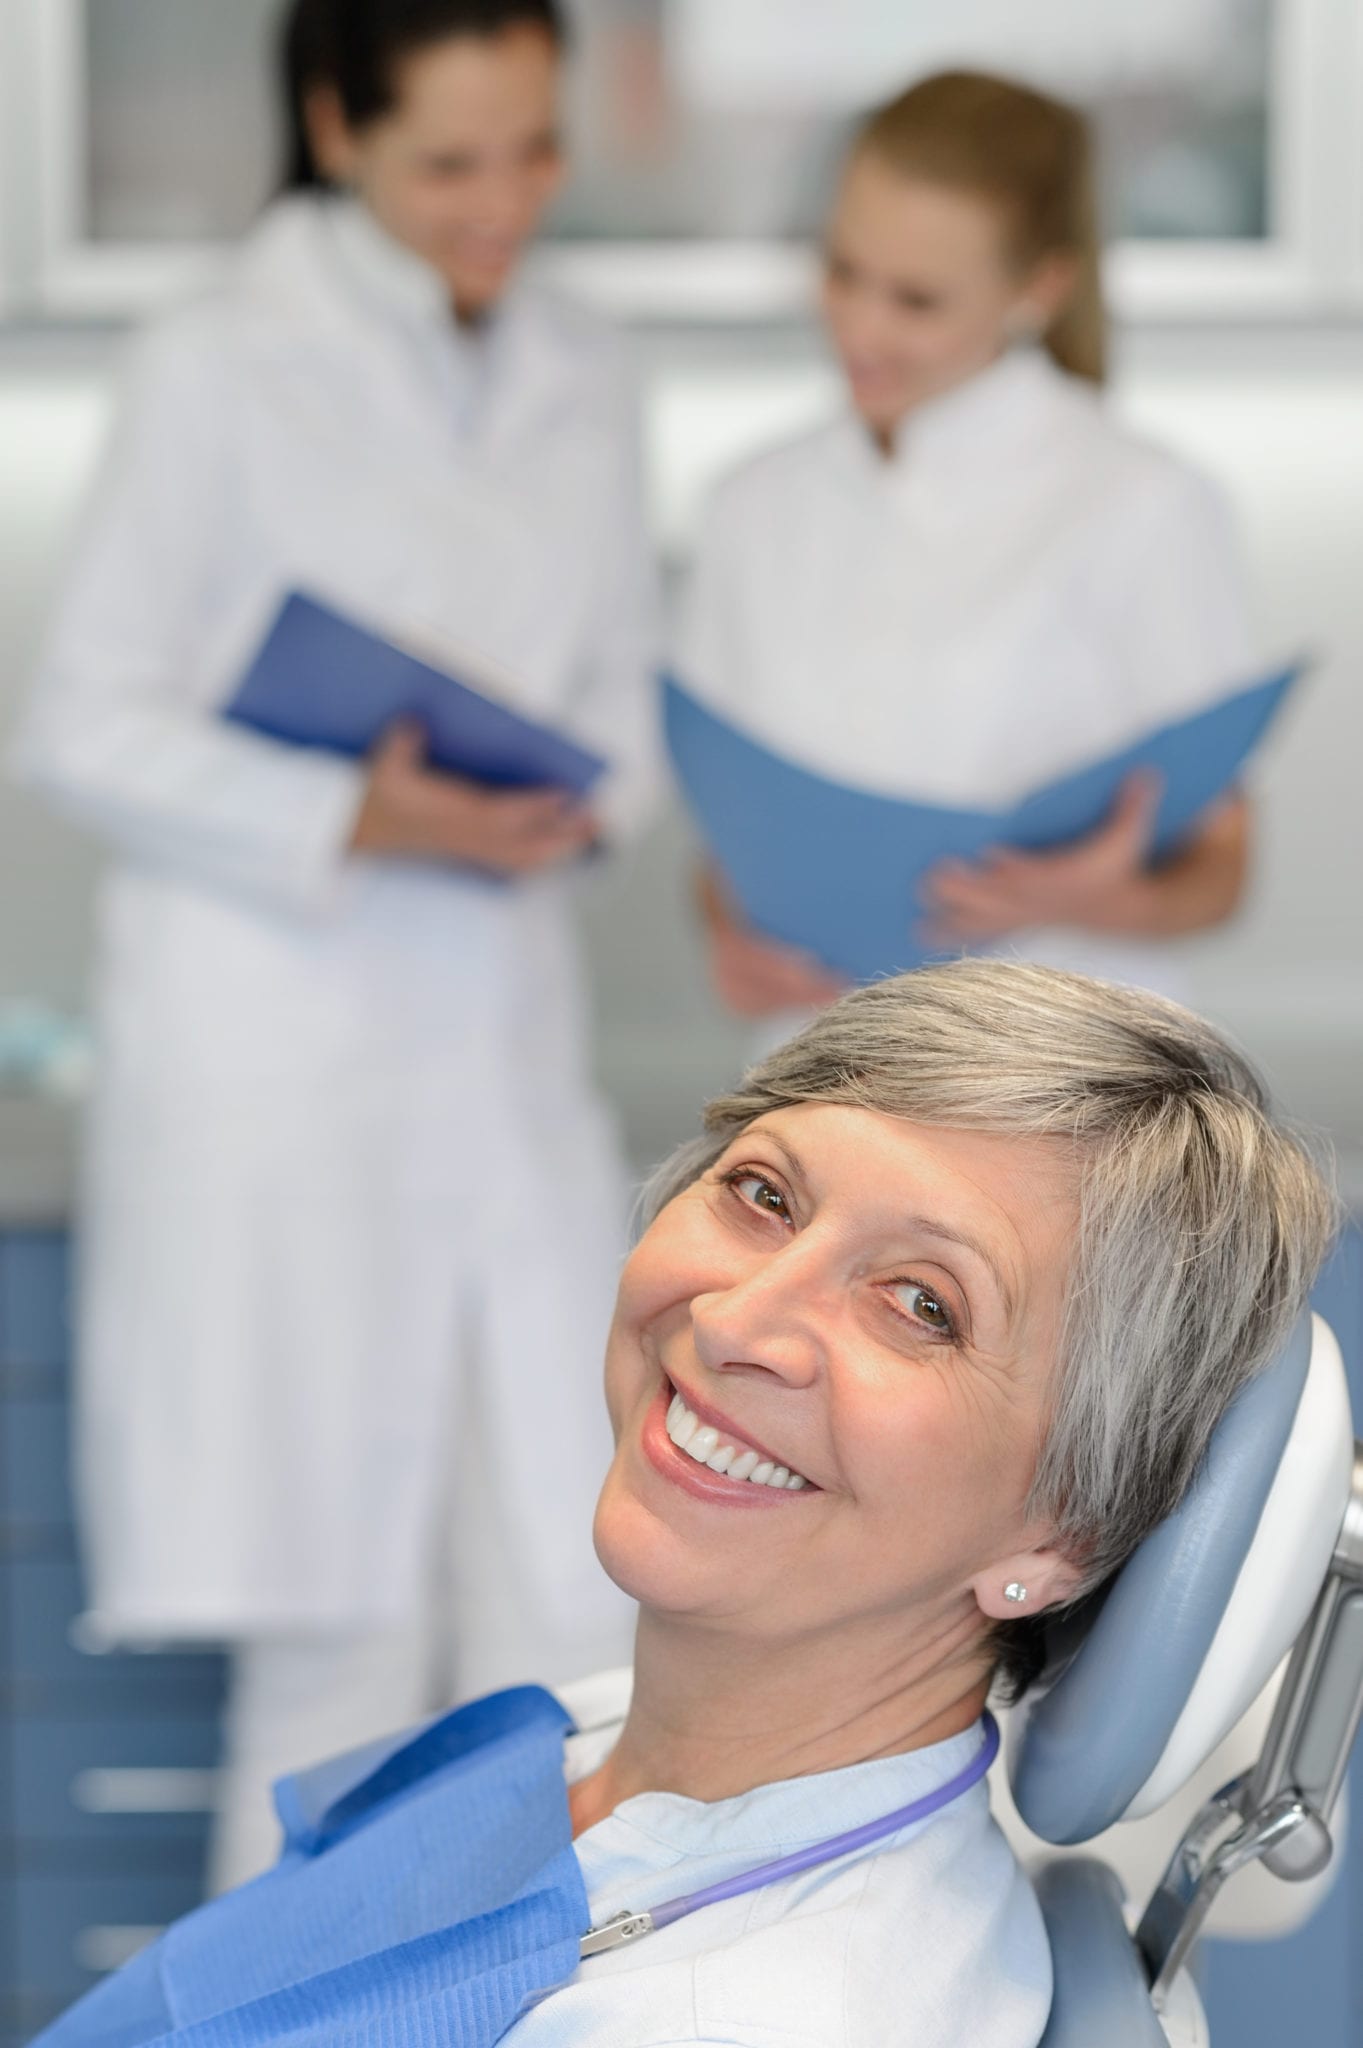 Mature Female In Dental Chair With Doctors in the Background